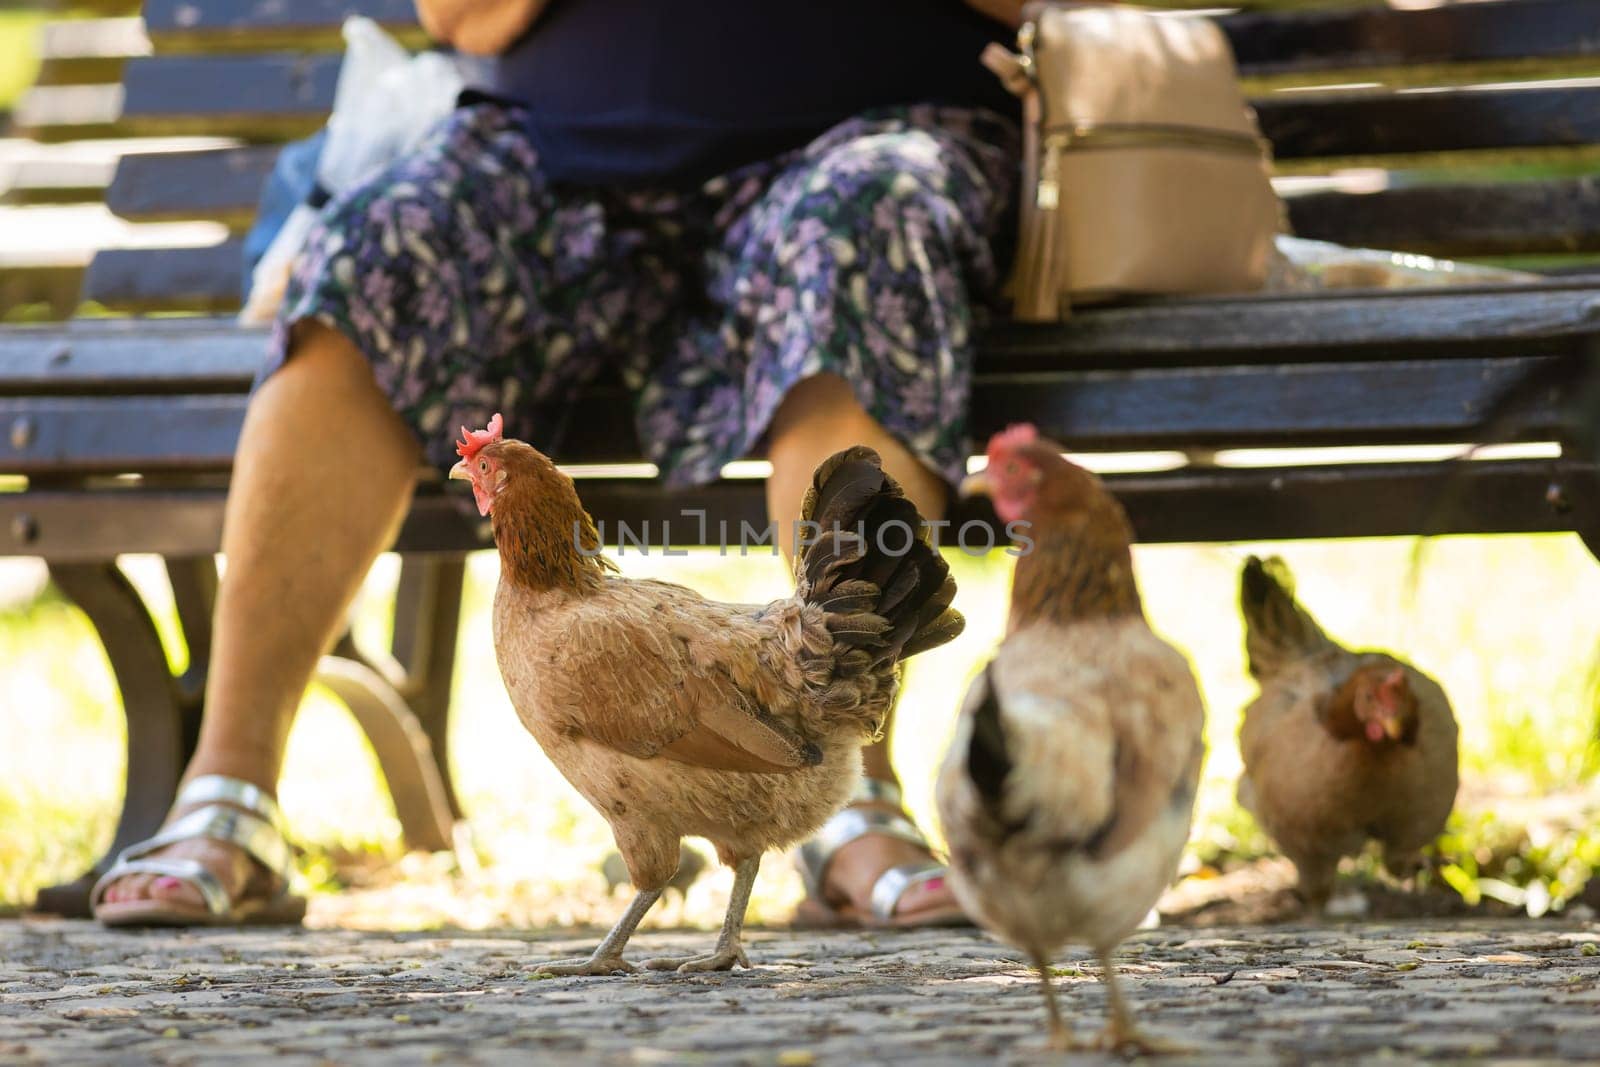 Chickens walk in the park near a bench with a person sitting on it by Studia72